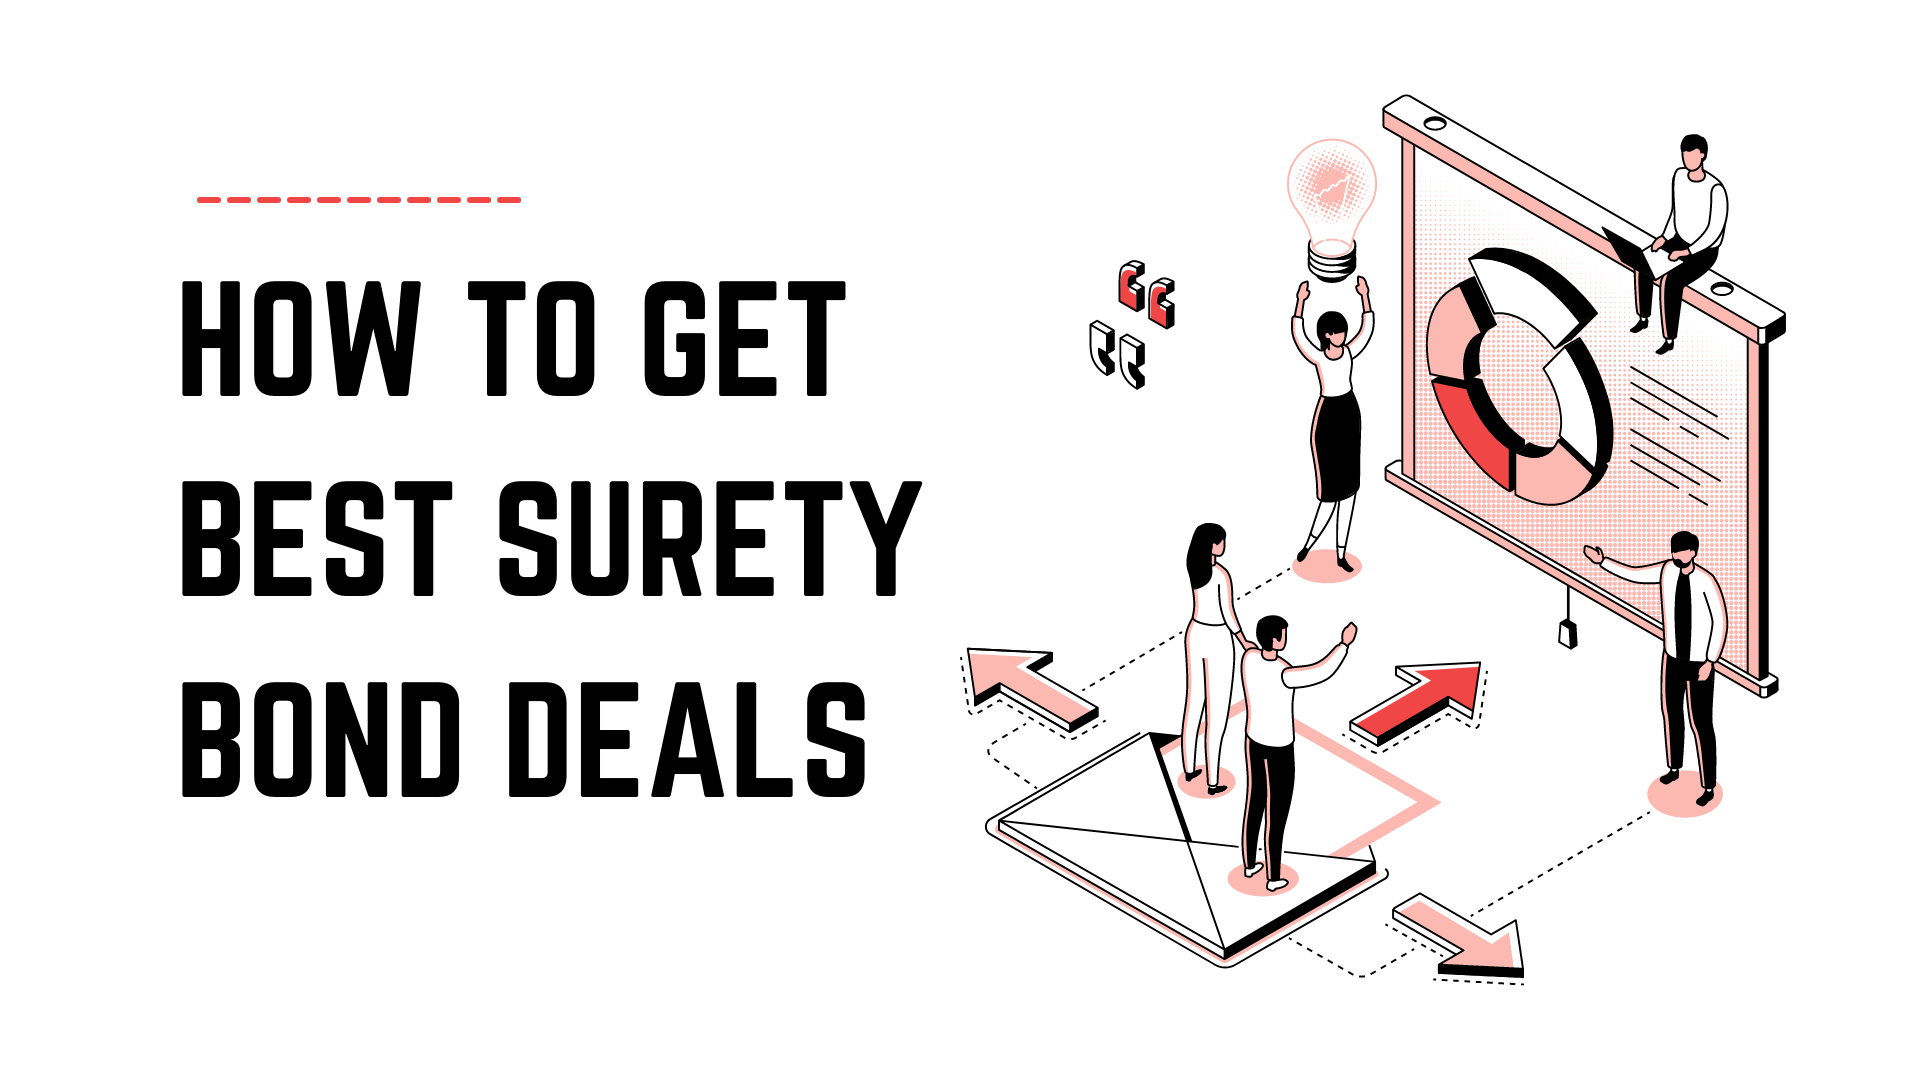 surety bond - How do you go about securing a surety bond - business concept